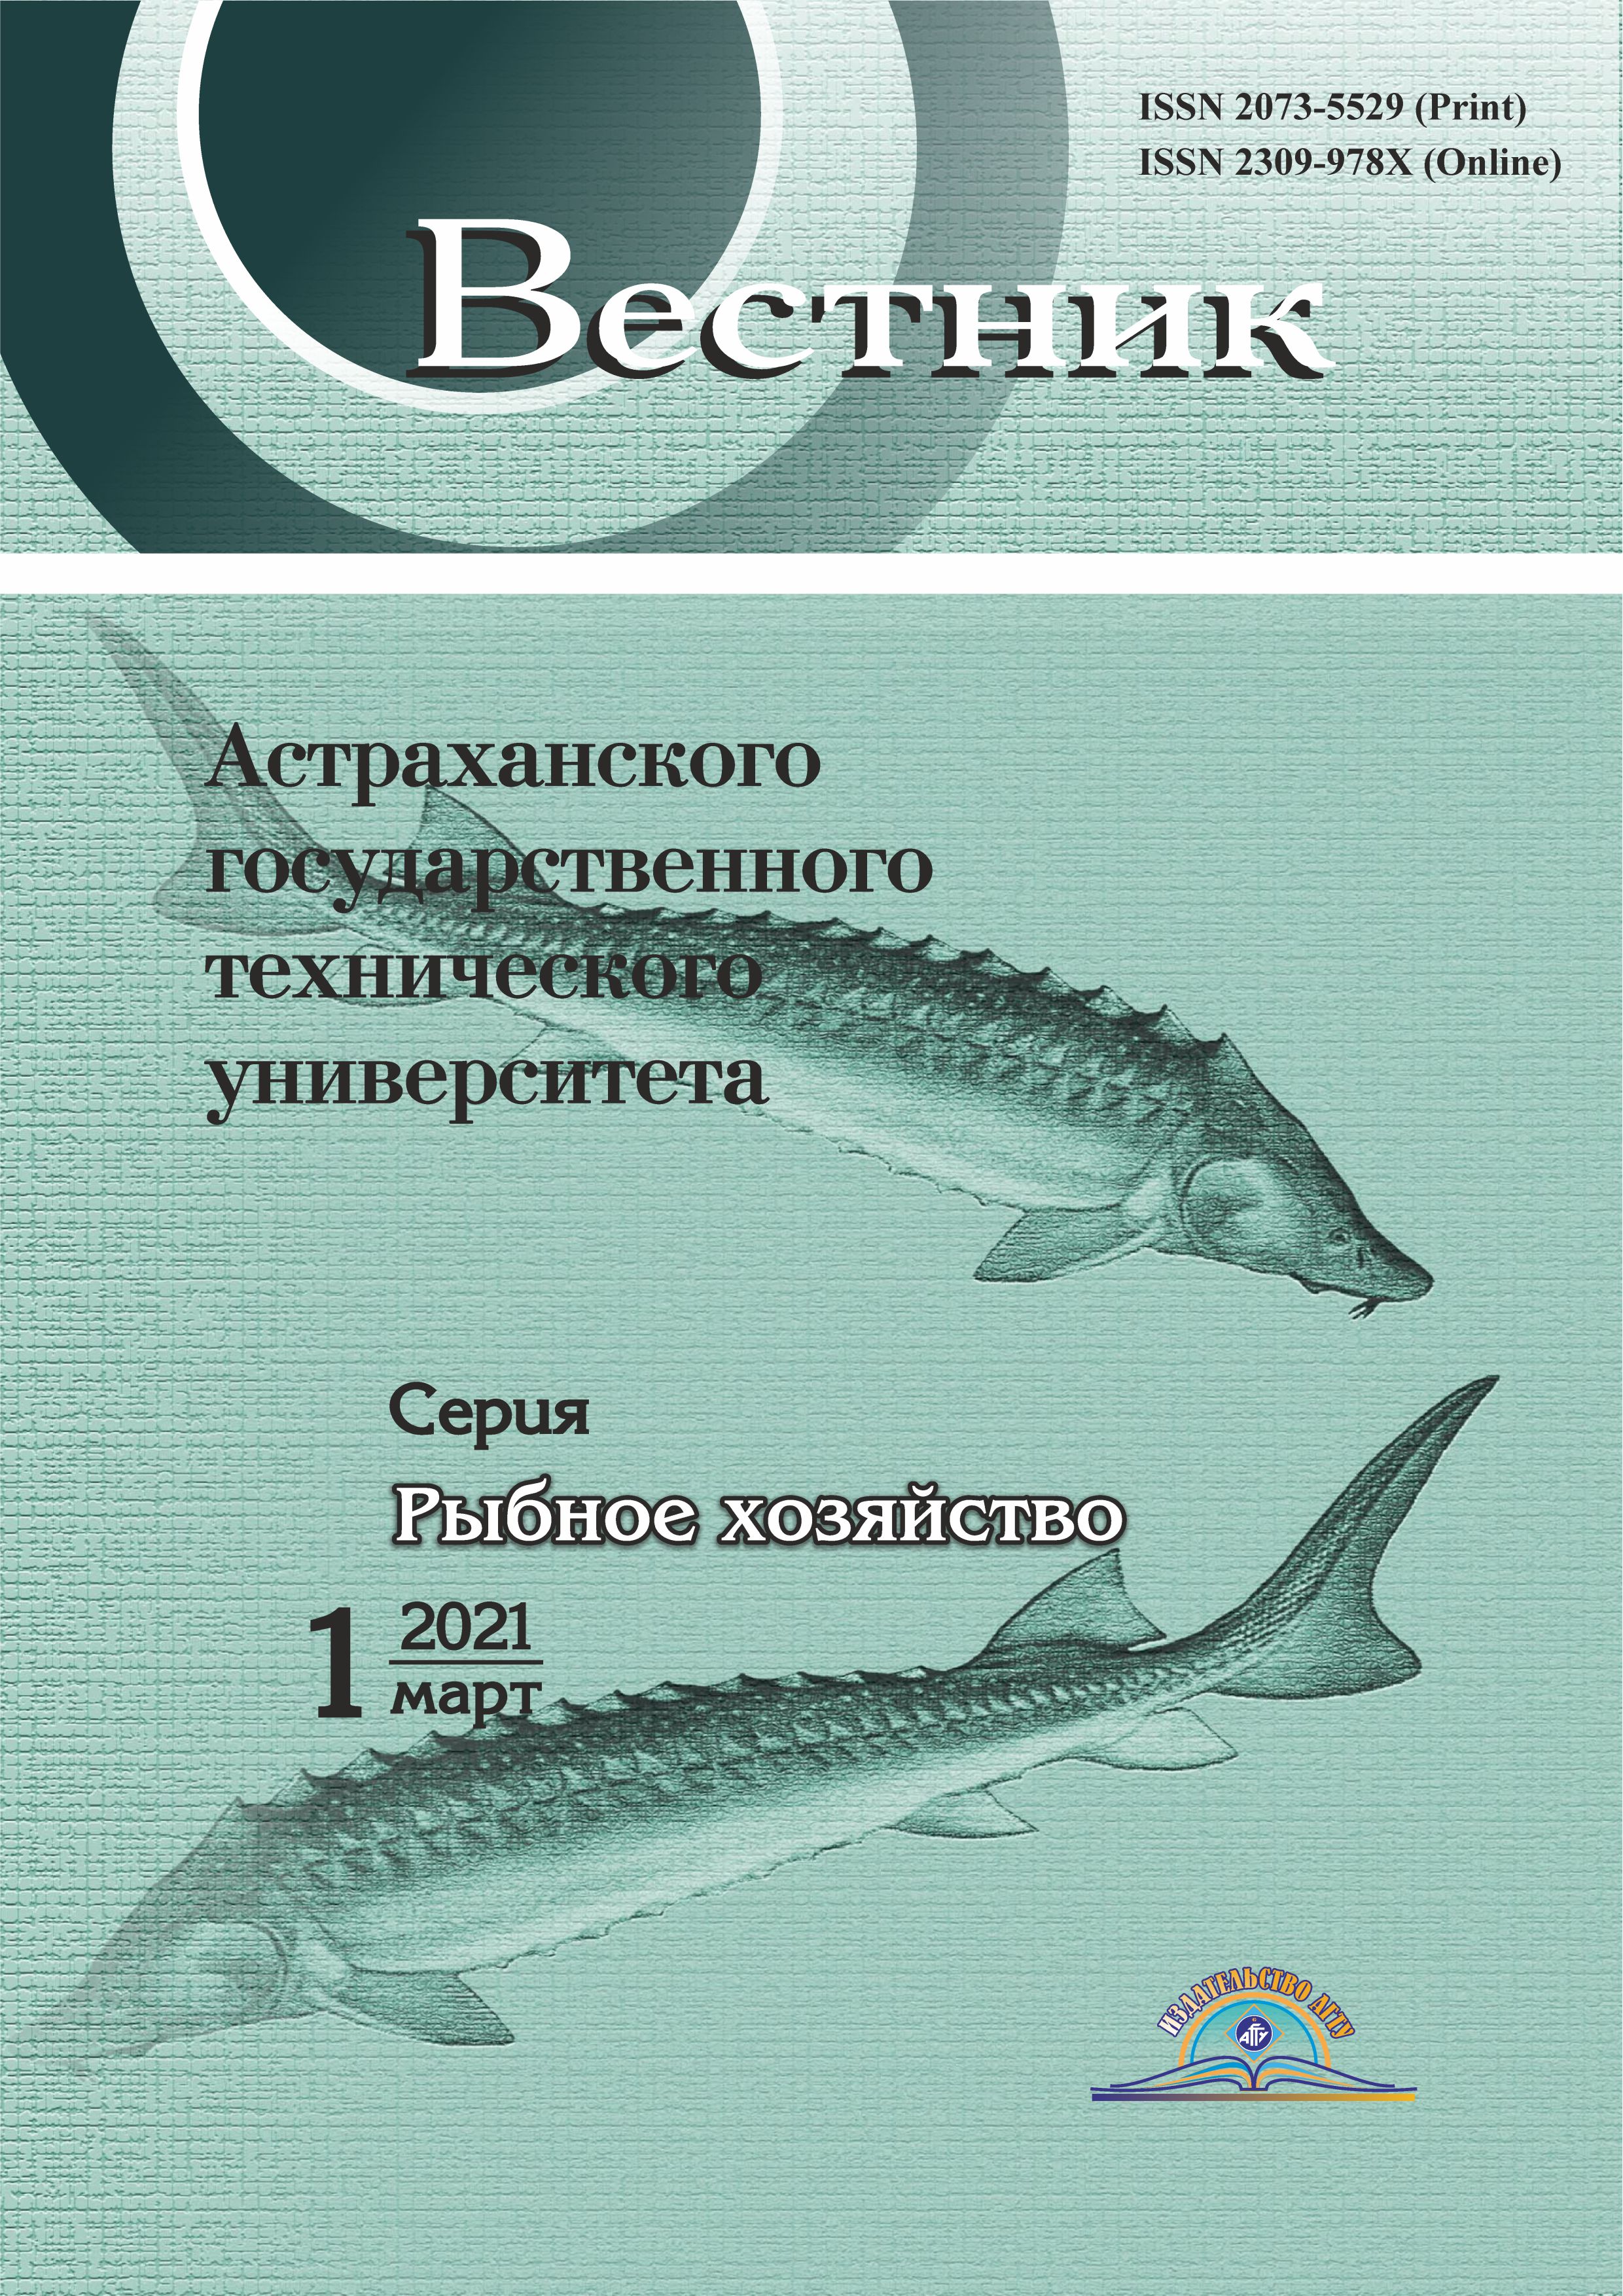                         ANALYZING STOCK STATUS OF MAIN COMMERCIAL FISH  IN KUIBYSHEV RESERVOIR  IN 2000–2018 AND EFFECTIVENESS IN FISHING
            